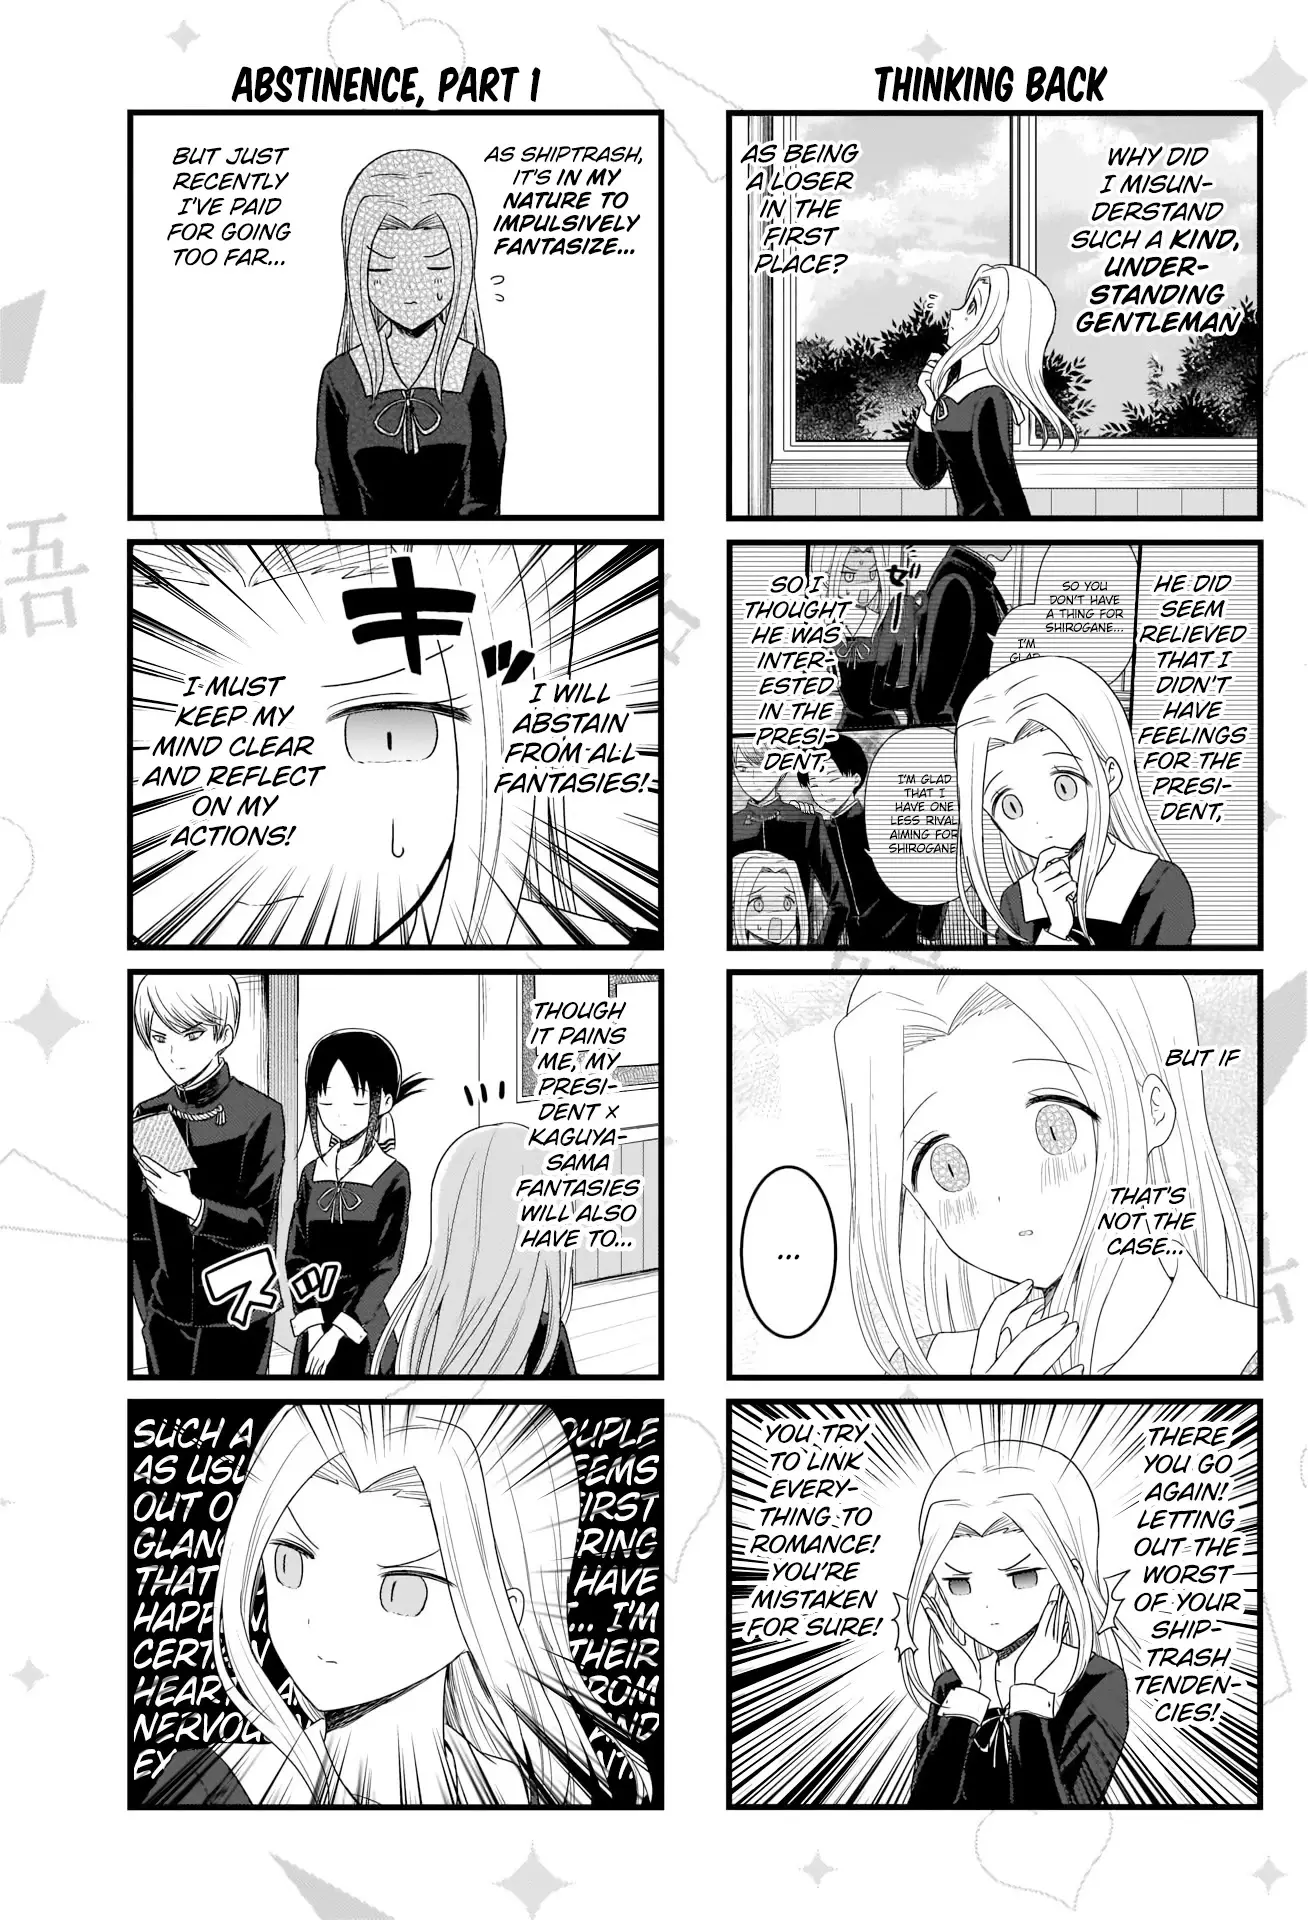 We Want To Talk About Kaguya - 126 page 4